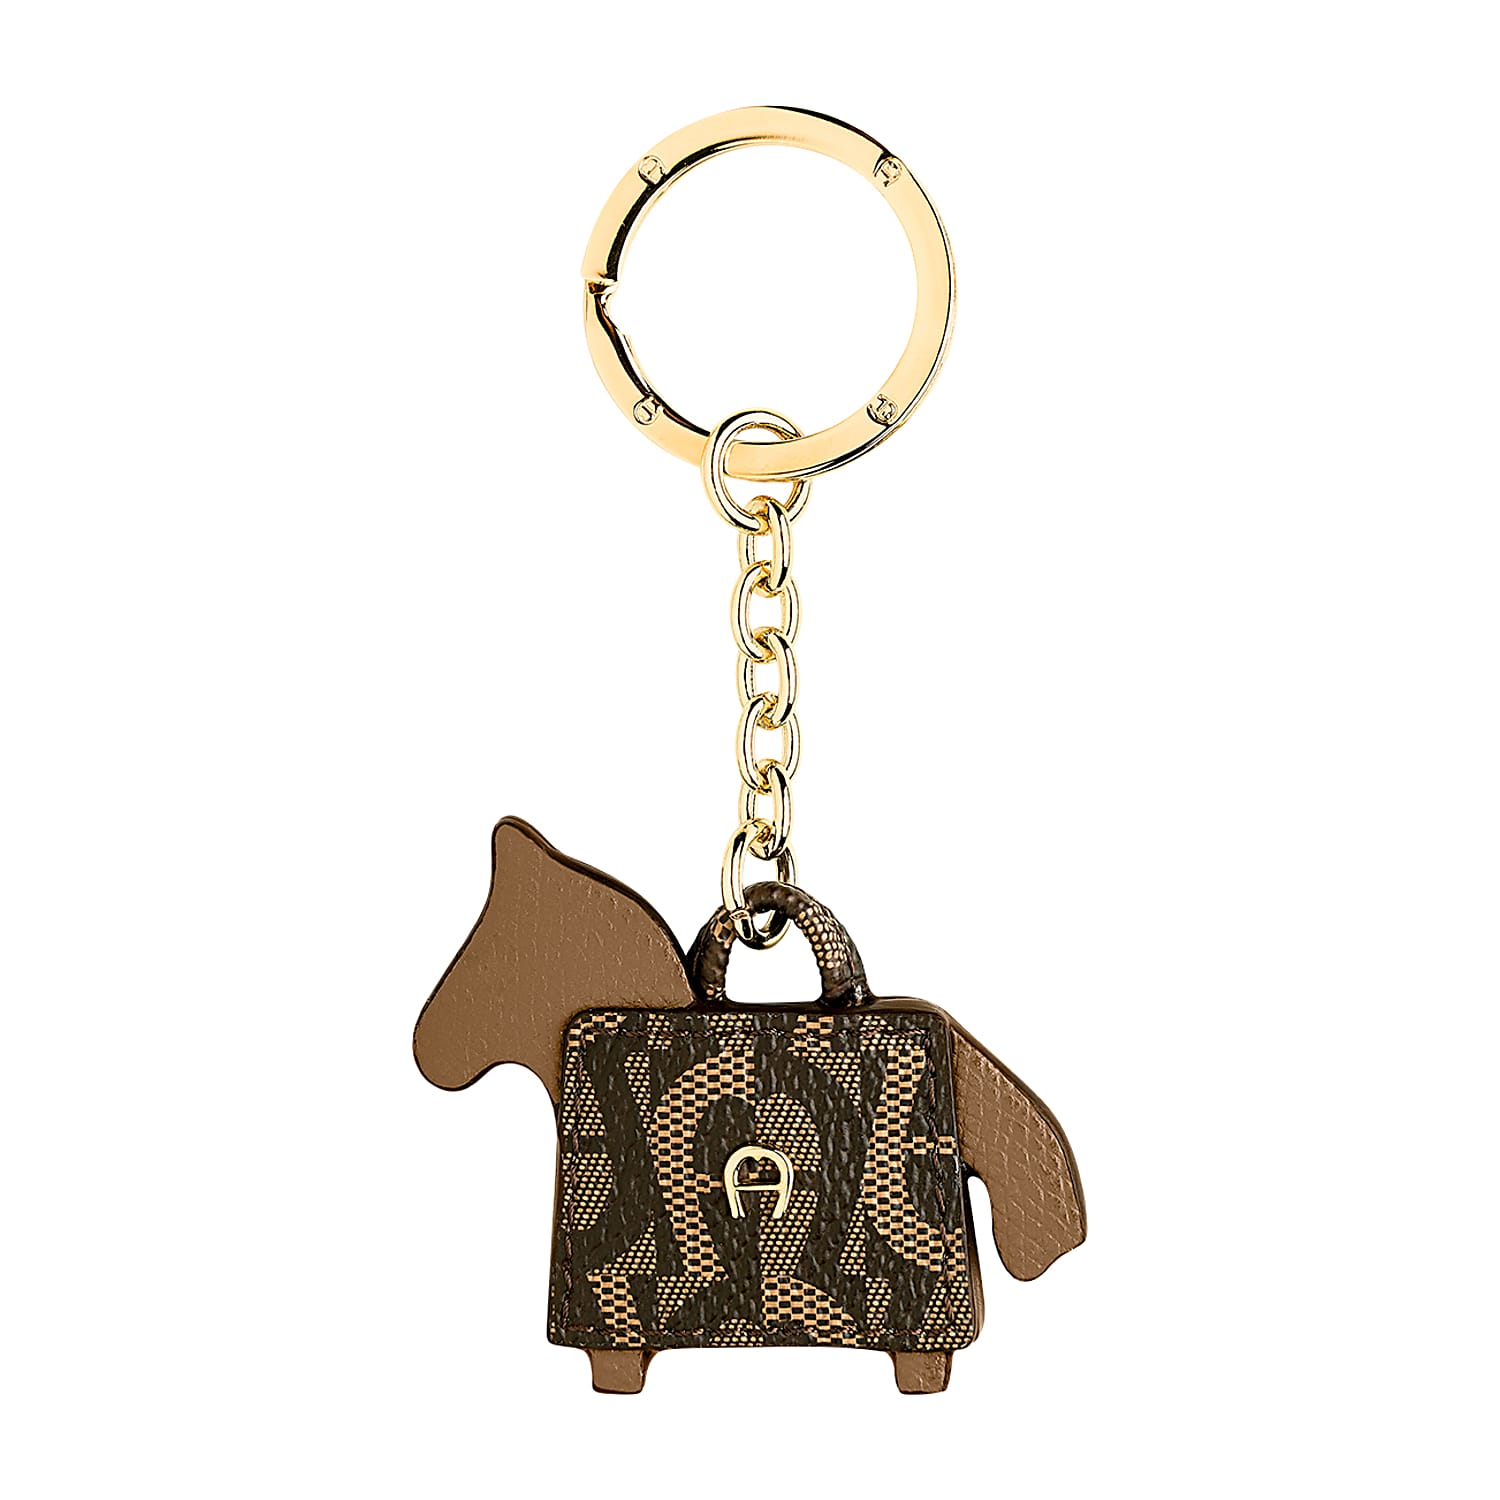 Keychain Horse and Bag